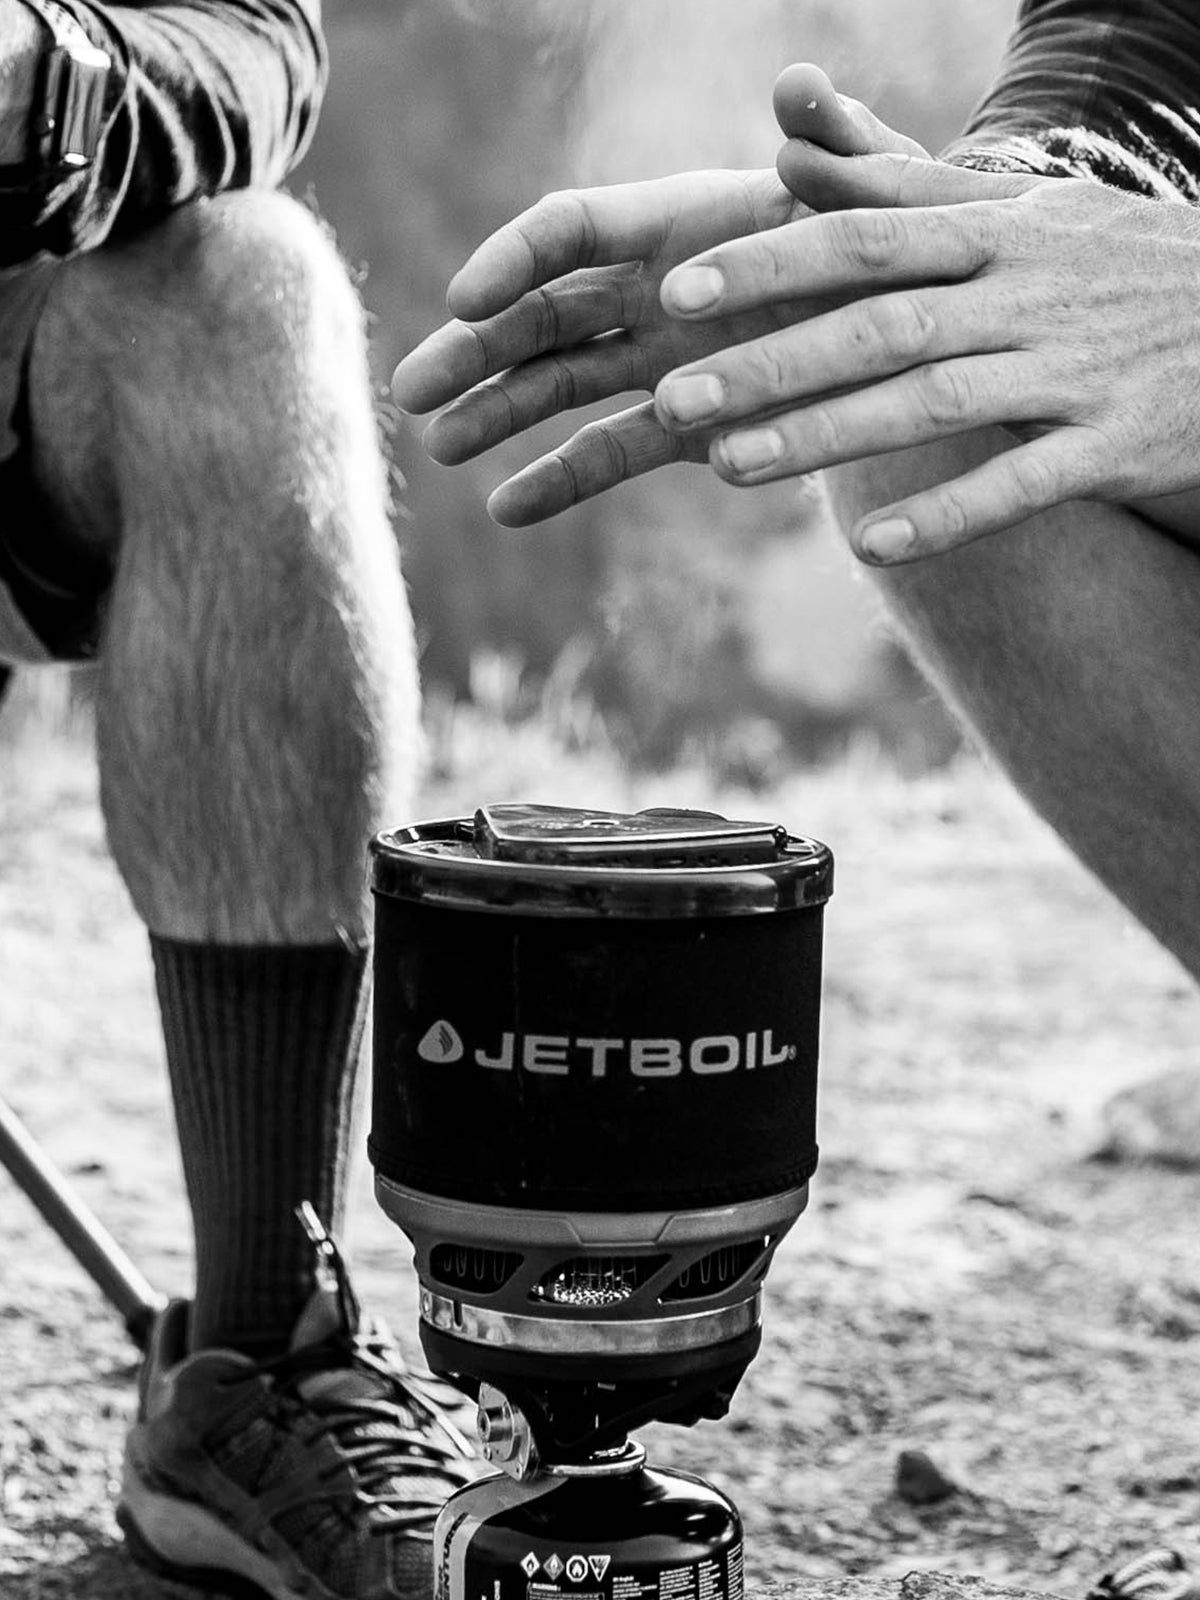 warming hands by Jetboil MINIMO